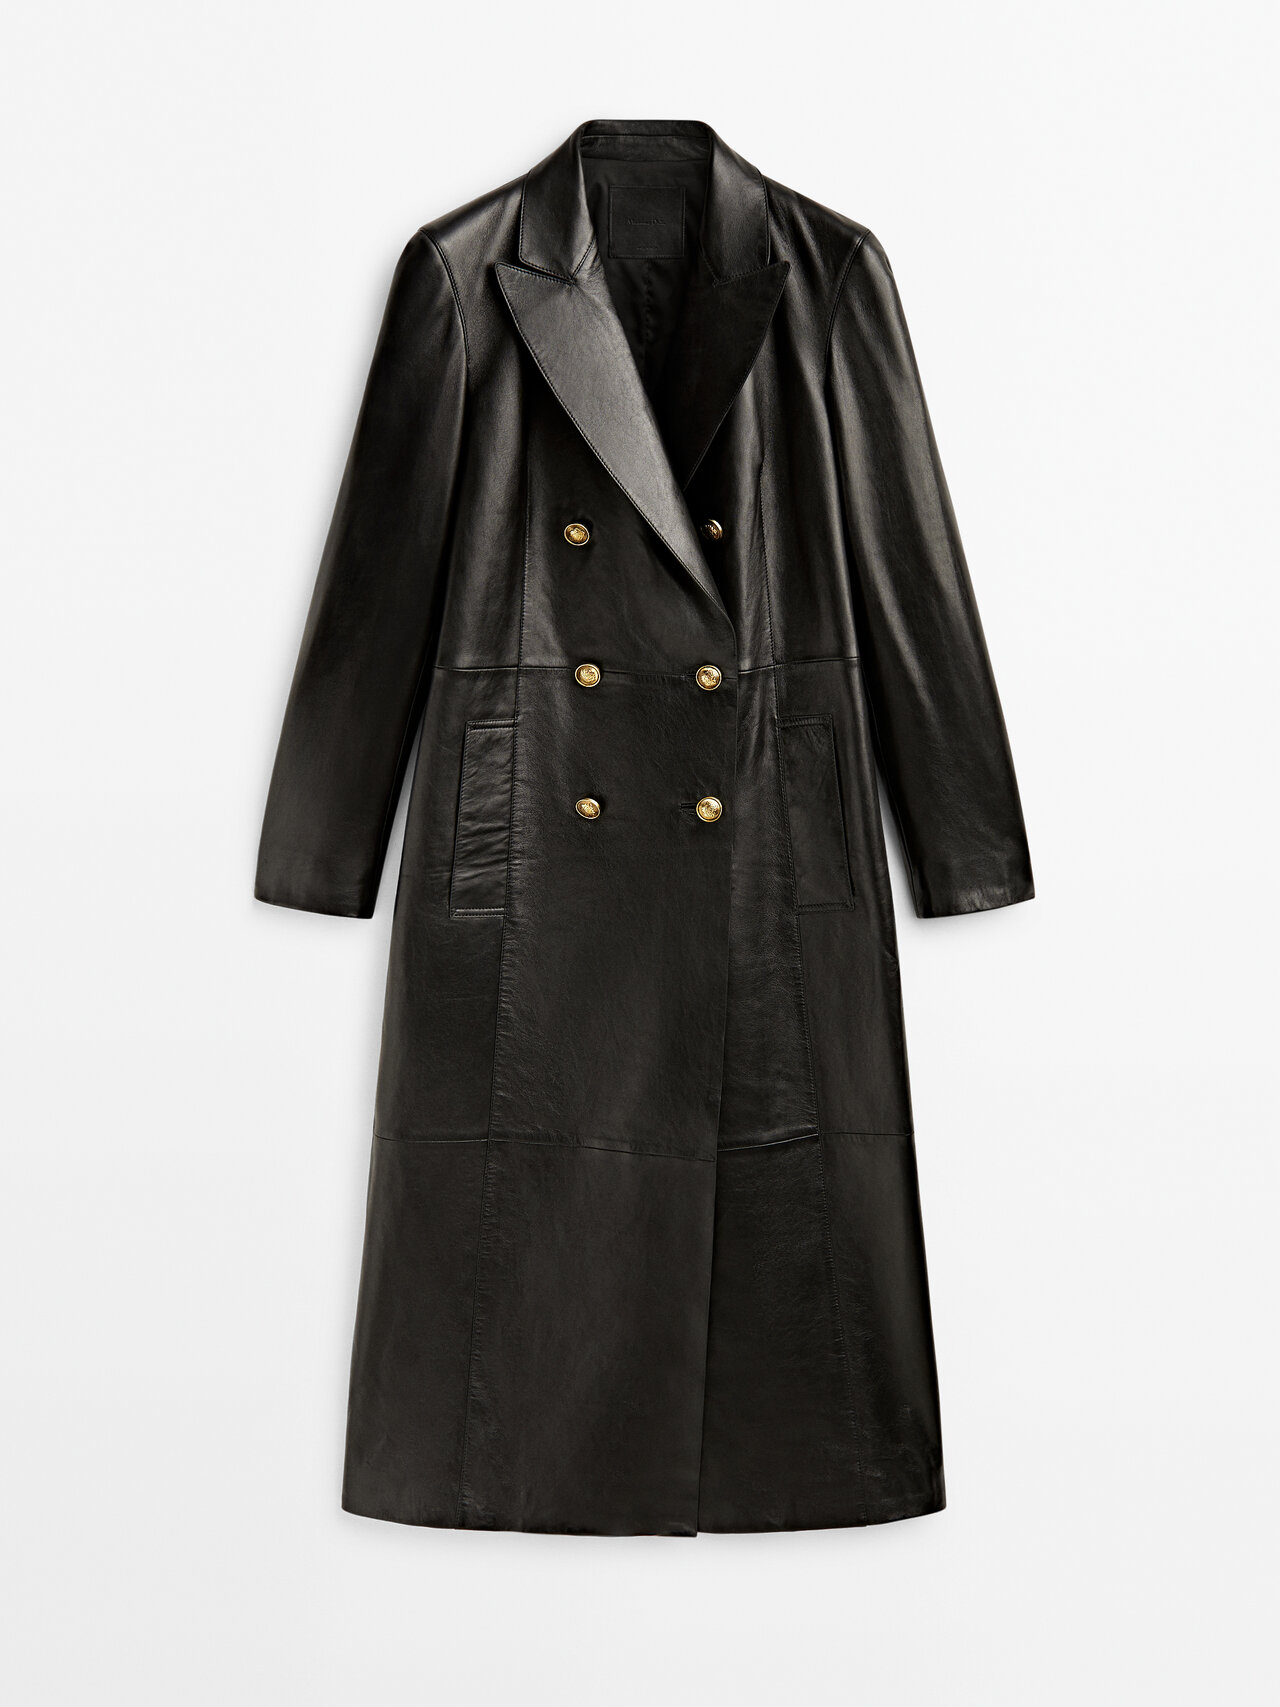 Massimo Dutti Nappa Trench Coat With Gold-toned Buttons In Black | ModeSens